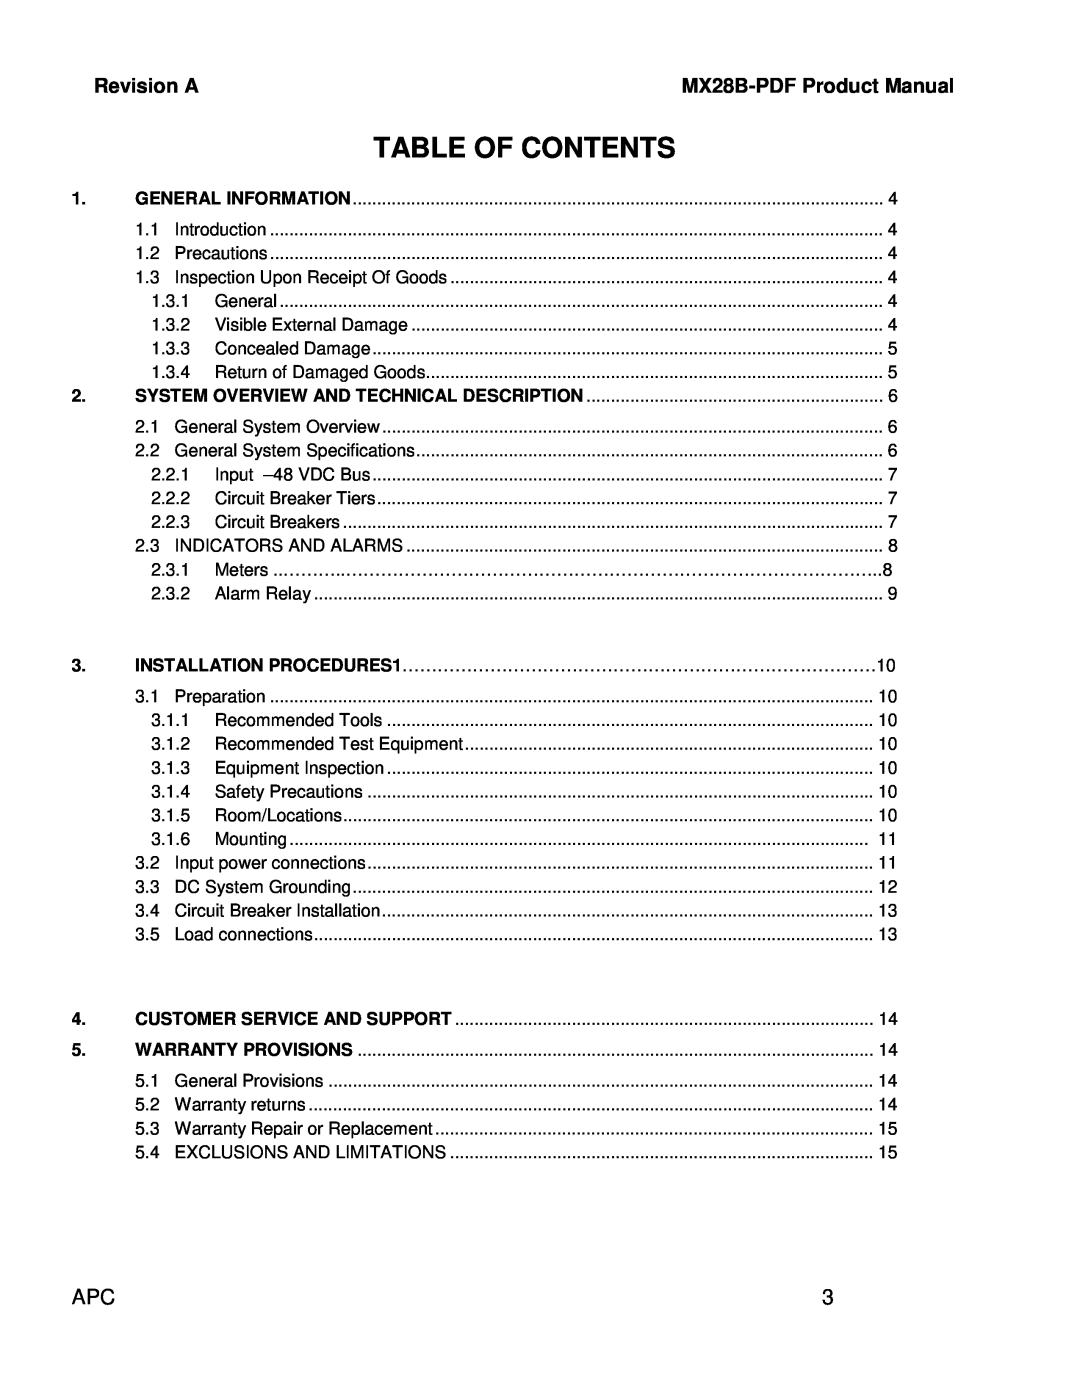 American Power Conversion MX28B-PDF manual Table Of Contents 